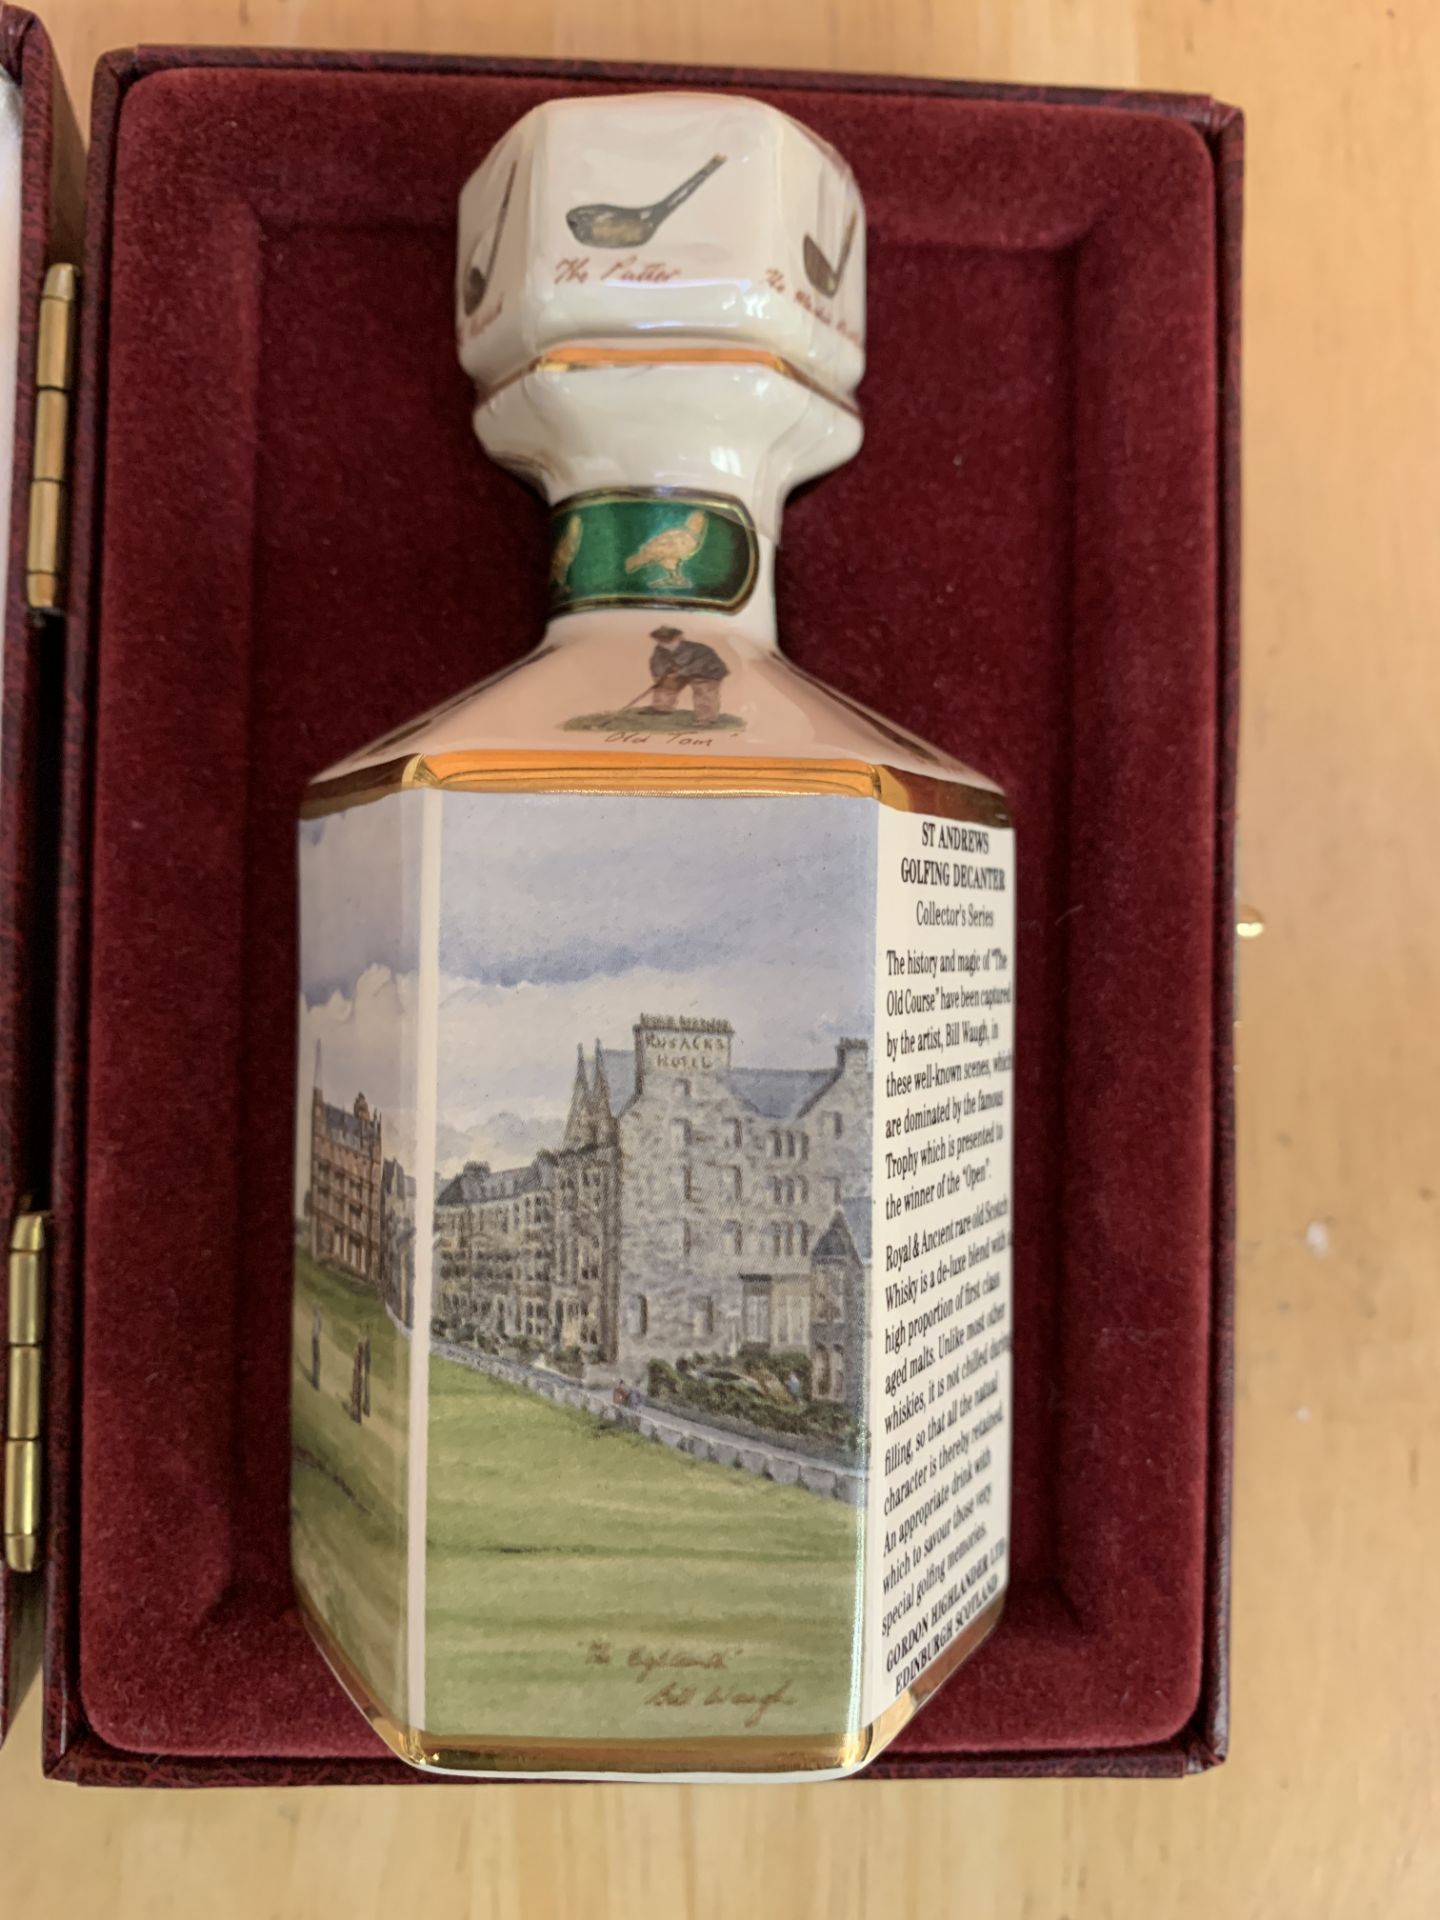 10cl 'Royal & Ancient' bottle of Gordon's rare old Scotch whisky - Image 3 of 3